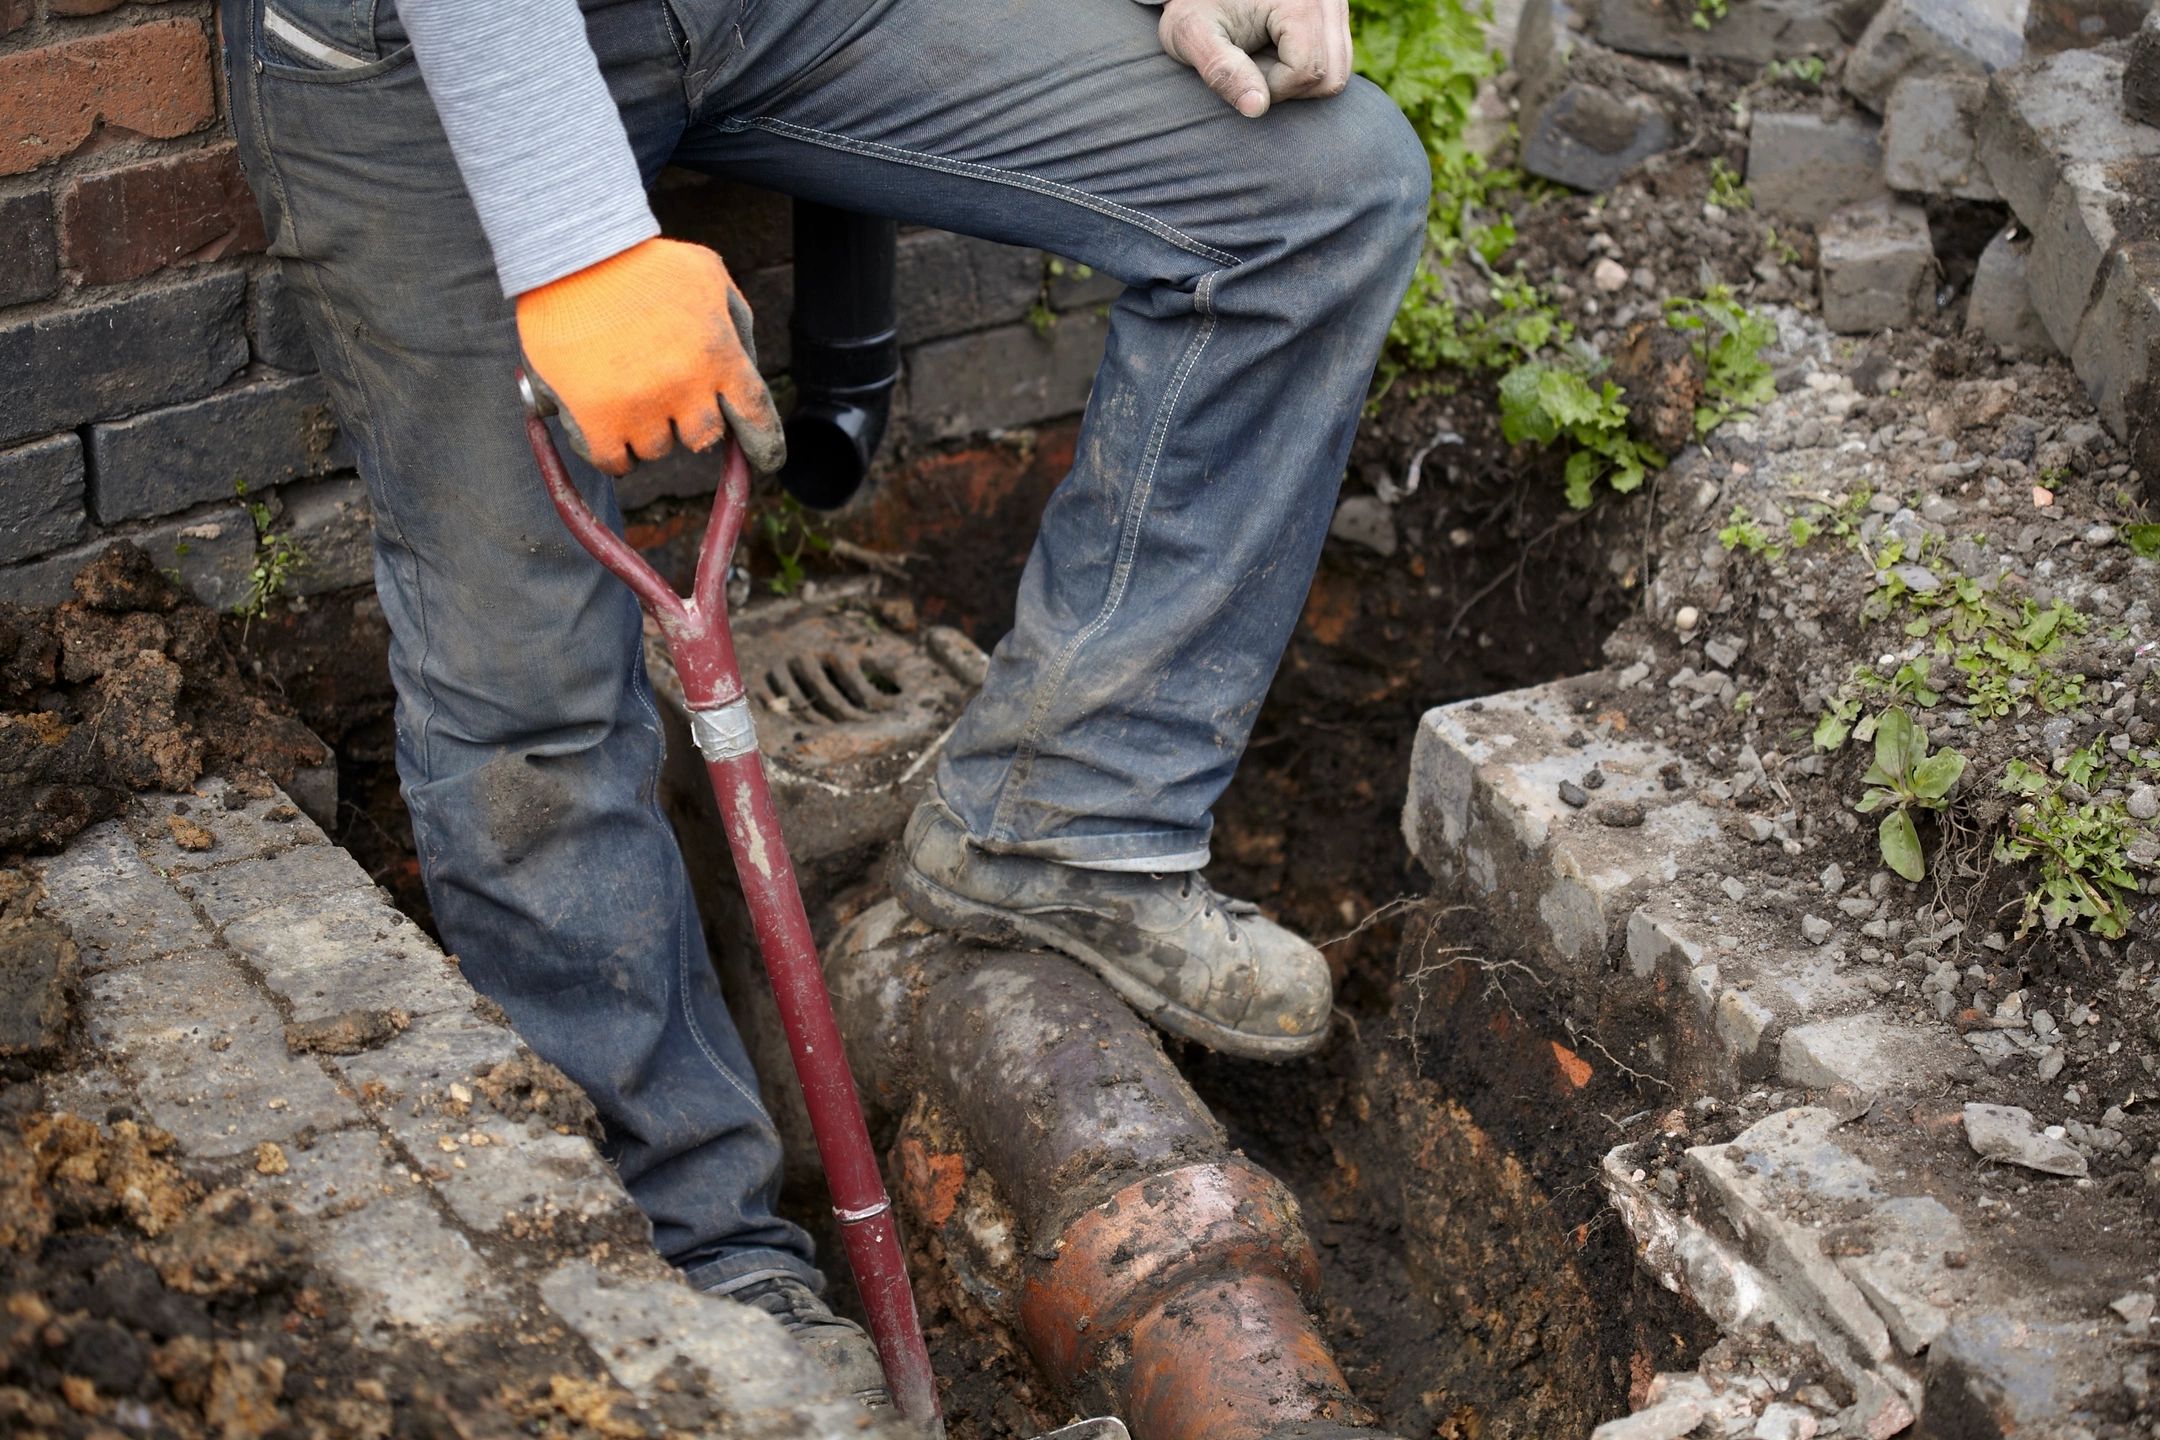 Sewer and septic systems